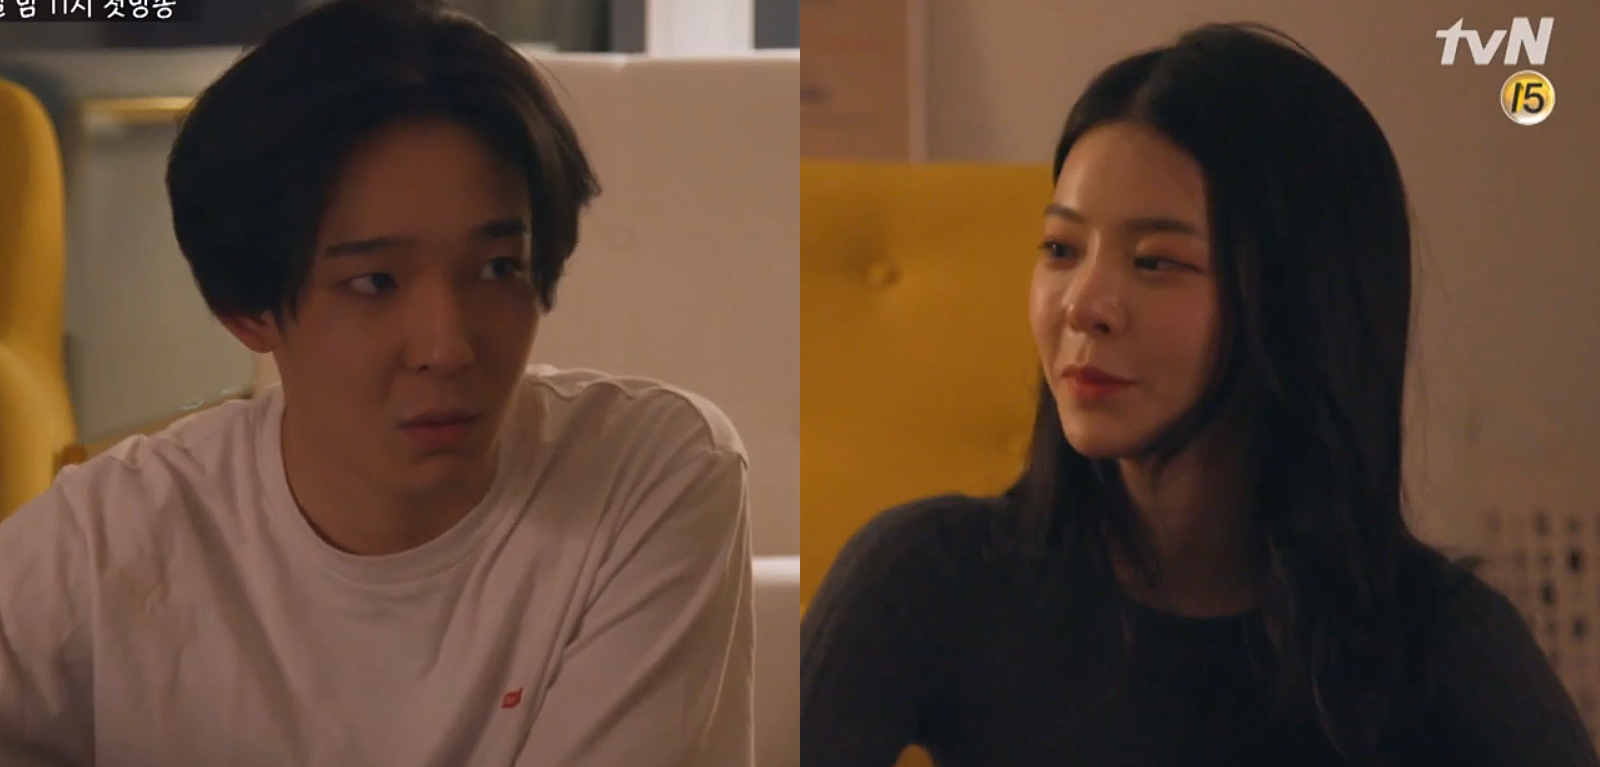 Nam Tae Hyun and Jang Jae In are in a relationship